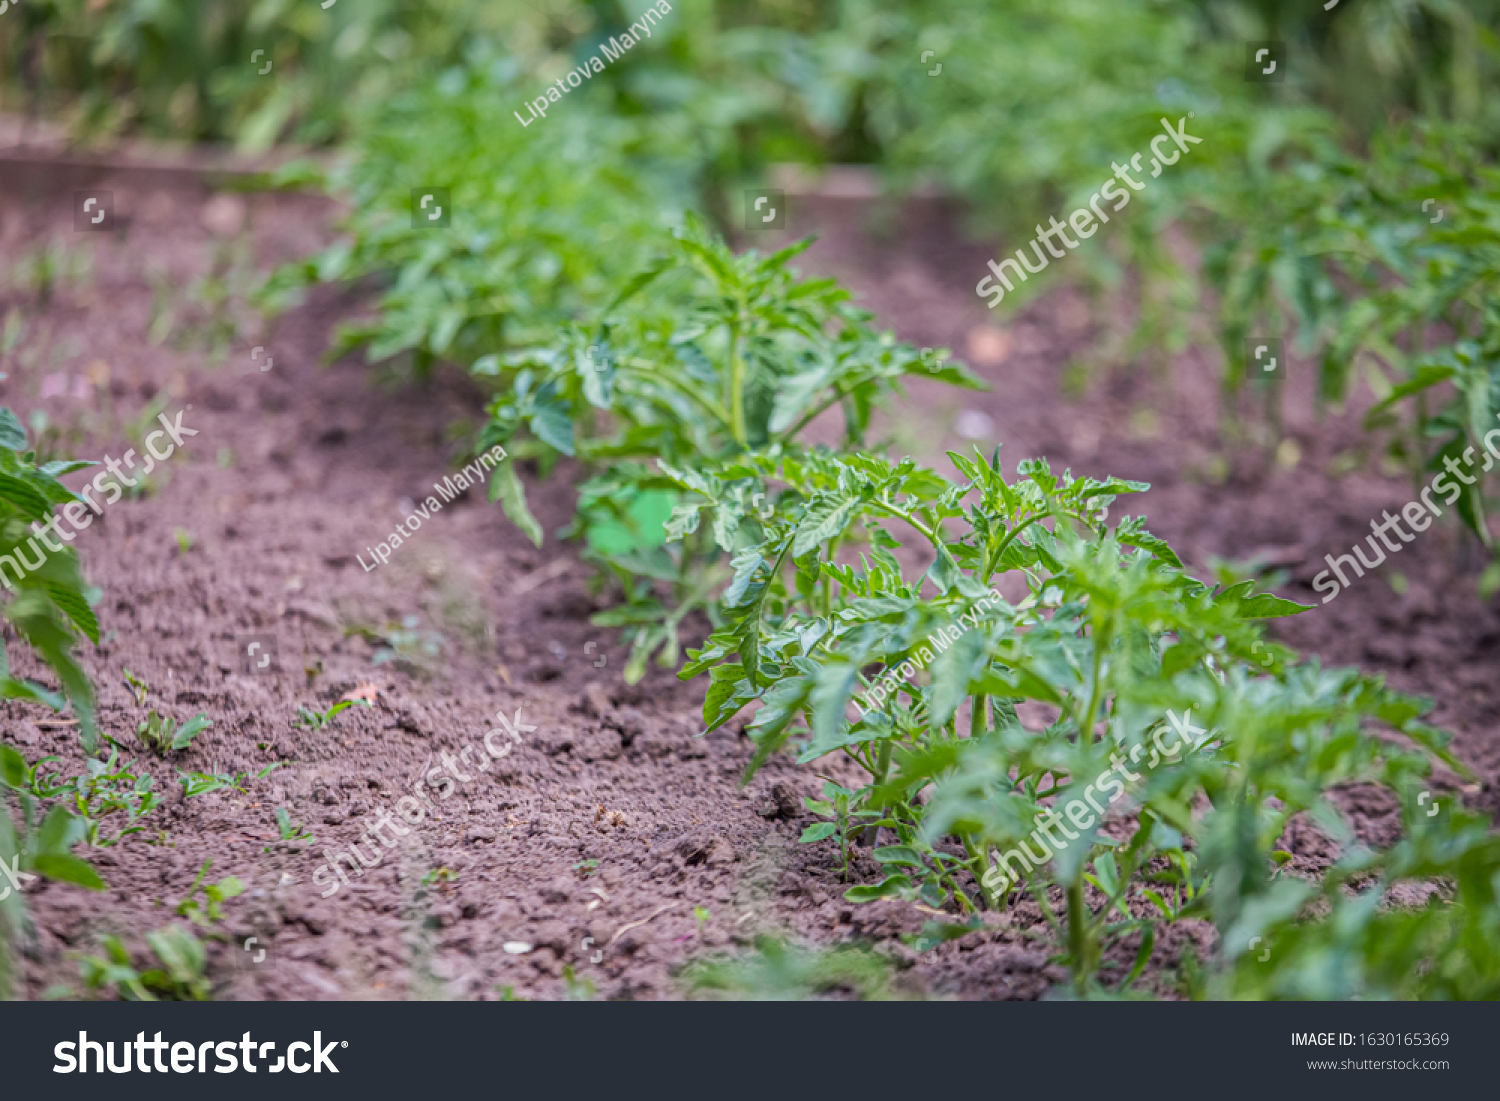 Growing tomatoes on bed in raw in field in spring. green seedling of tomatoes growing out of soil. Densely planted young tomato plants ready for planting. #1630165369